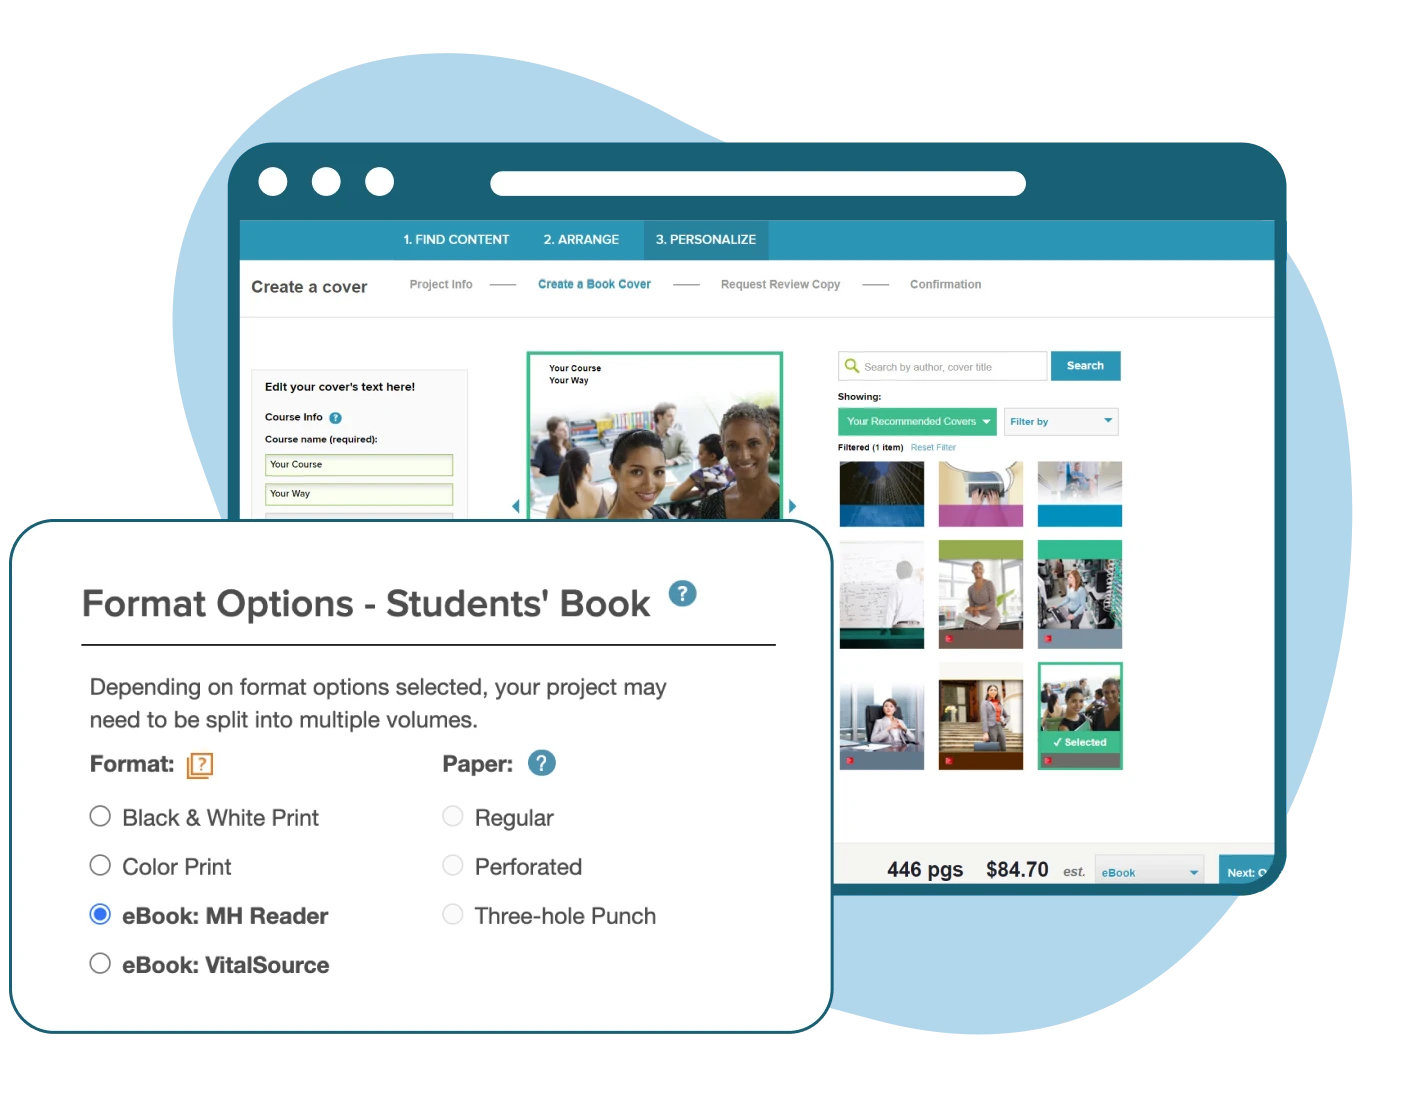 A screenshot from the platform Create on a “Personalize” screen where the user can customize the book cover, select format options for student use and add course info.